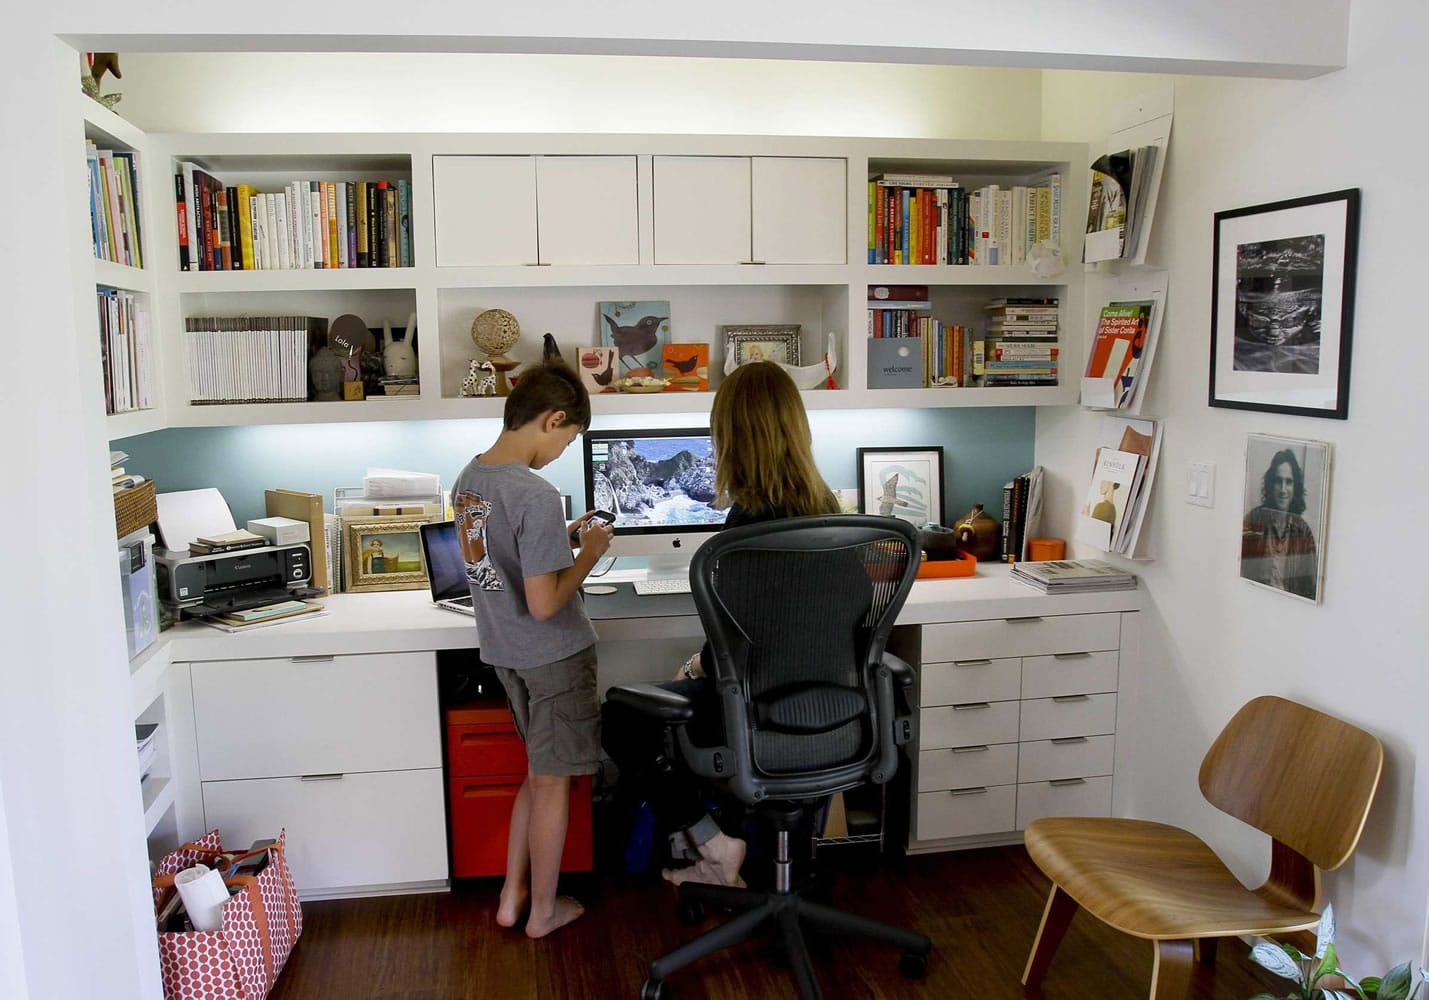 Arley Sakai, 9, talks to his mother, Wanda Weller-Sakai in her office at the family's home in Ojai, California, on March 2, 2012. The home is a 1970's ranch house recently remodeled in a modern style.